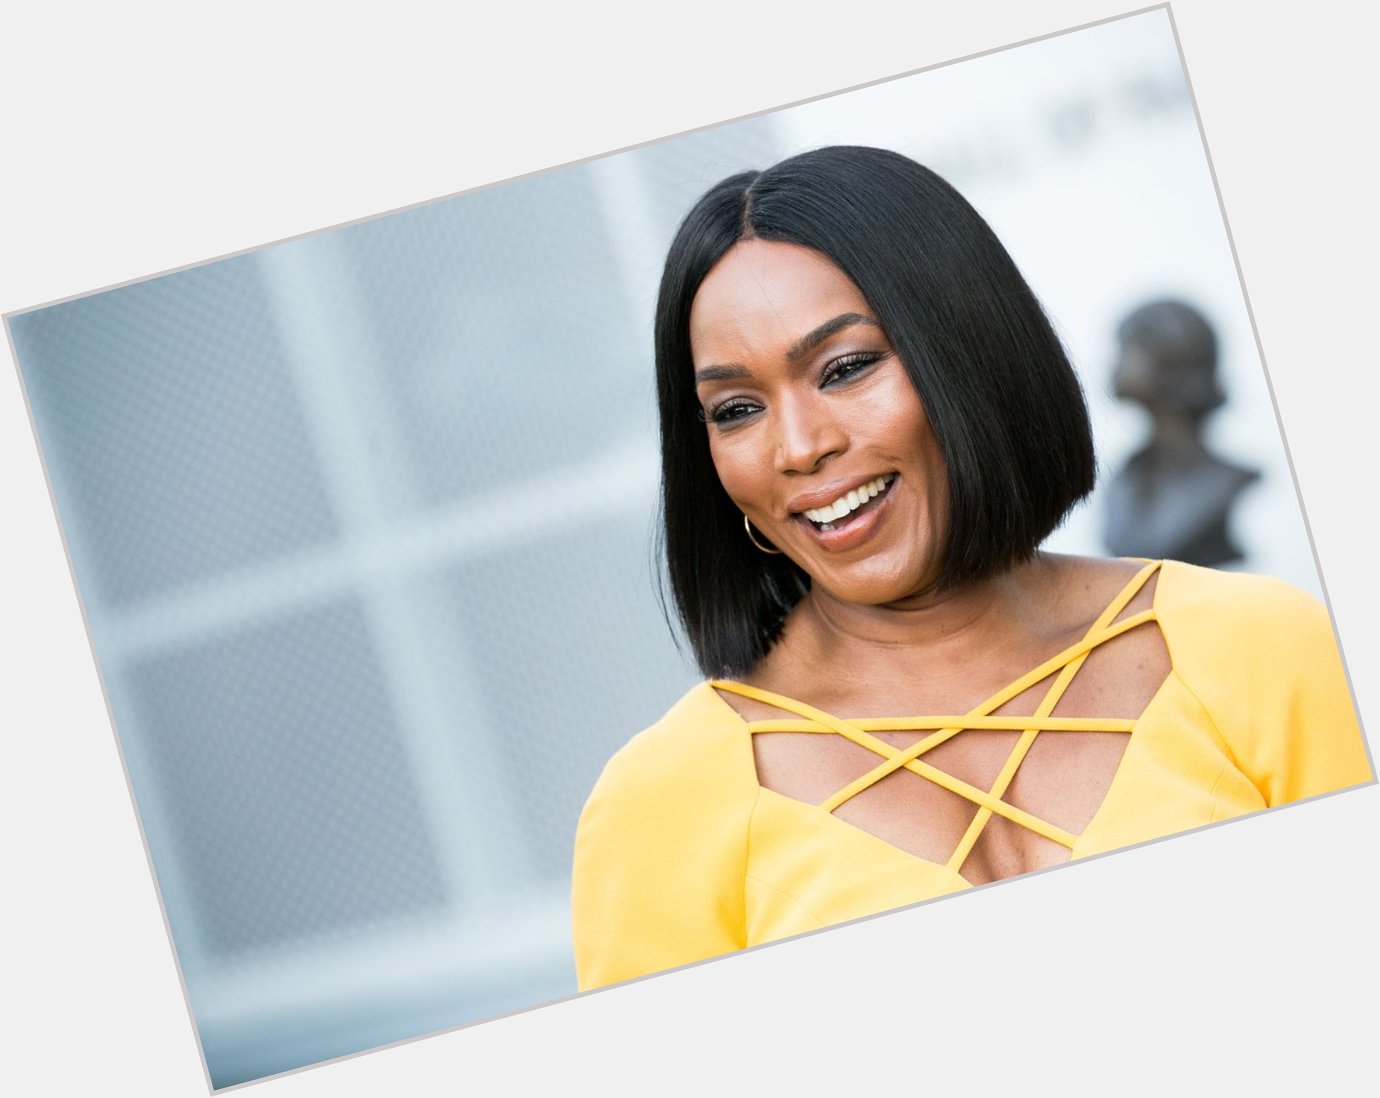 Happy Birthday to the forever flawless Angela Bassett! 